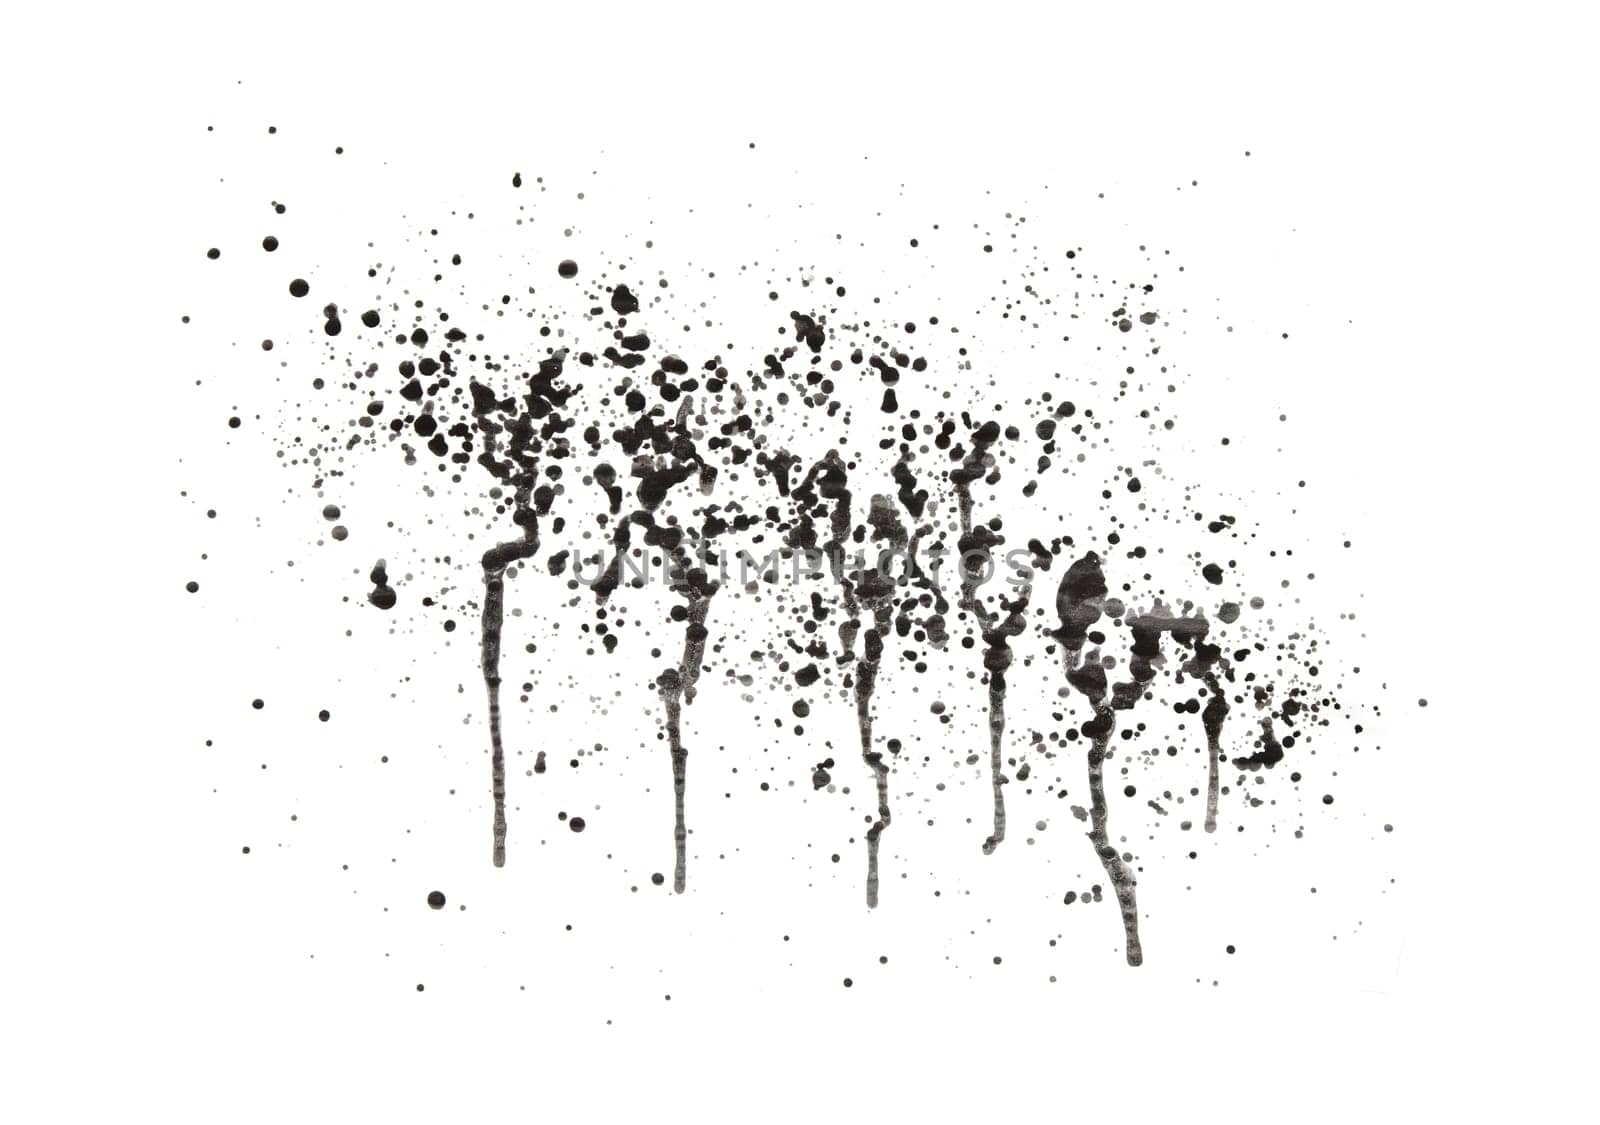 Splatter of black paint with streaks isolated on a white background. Stock photo.